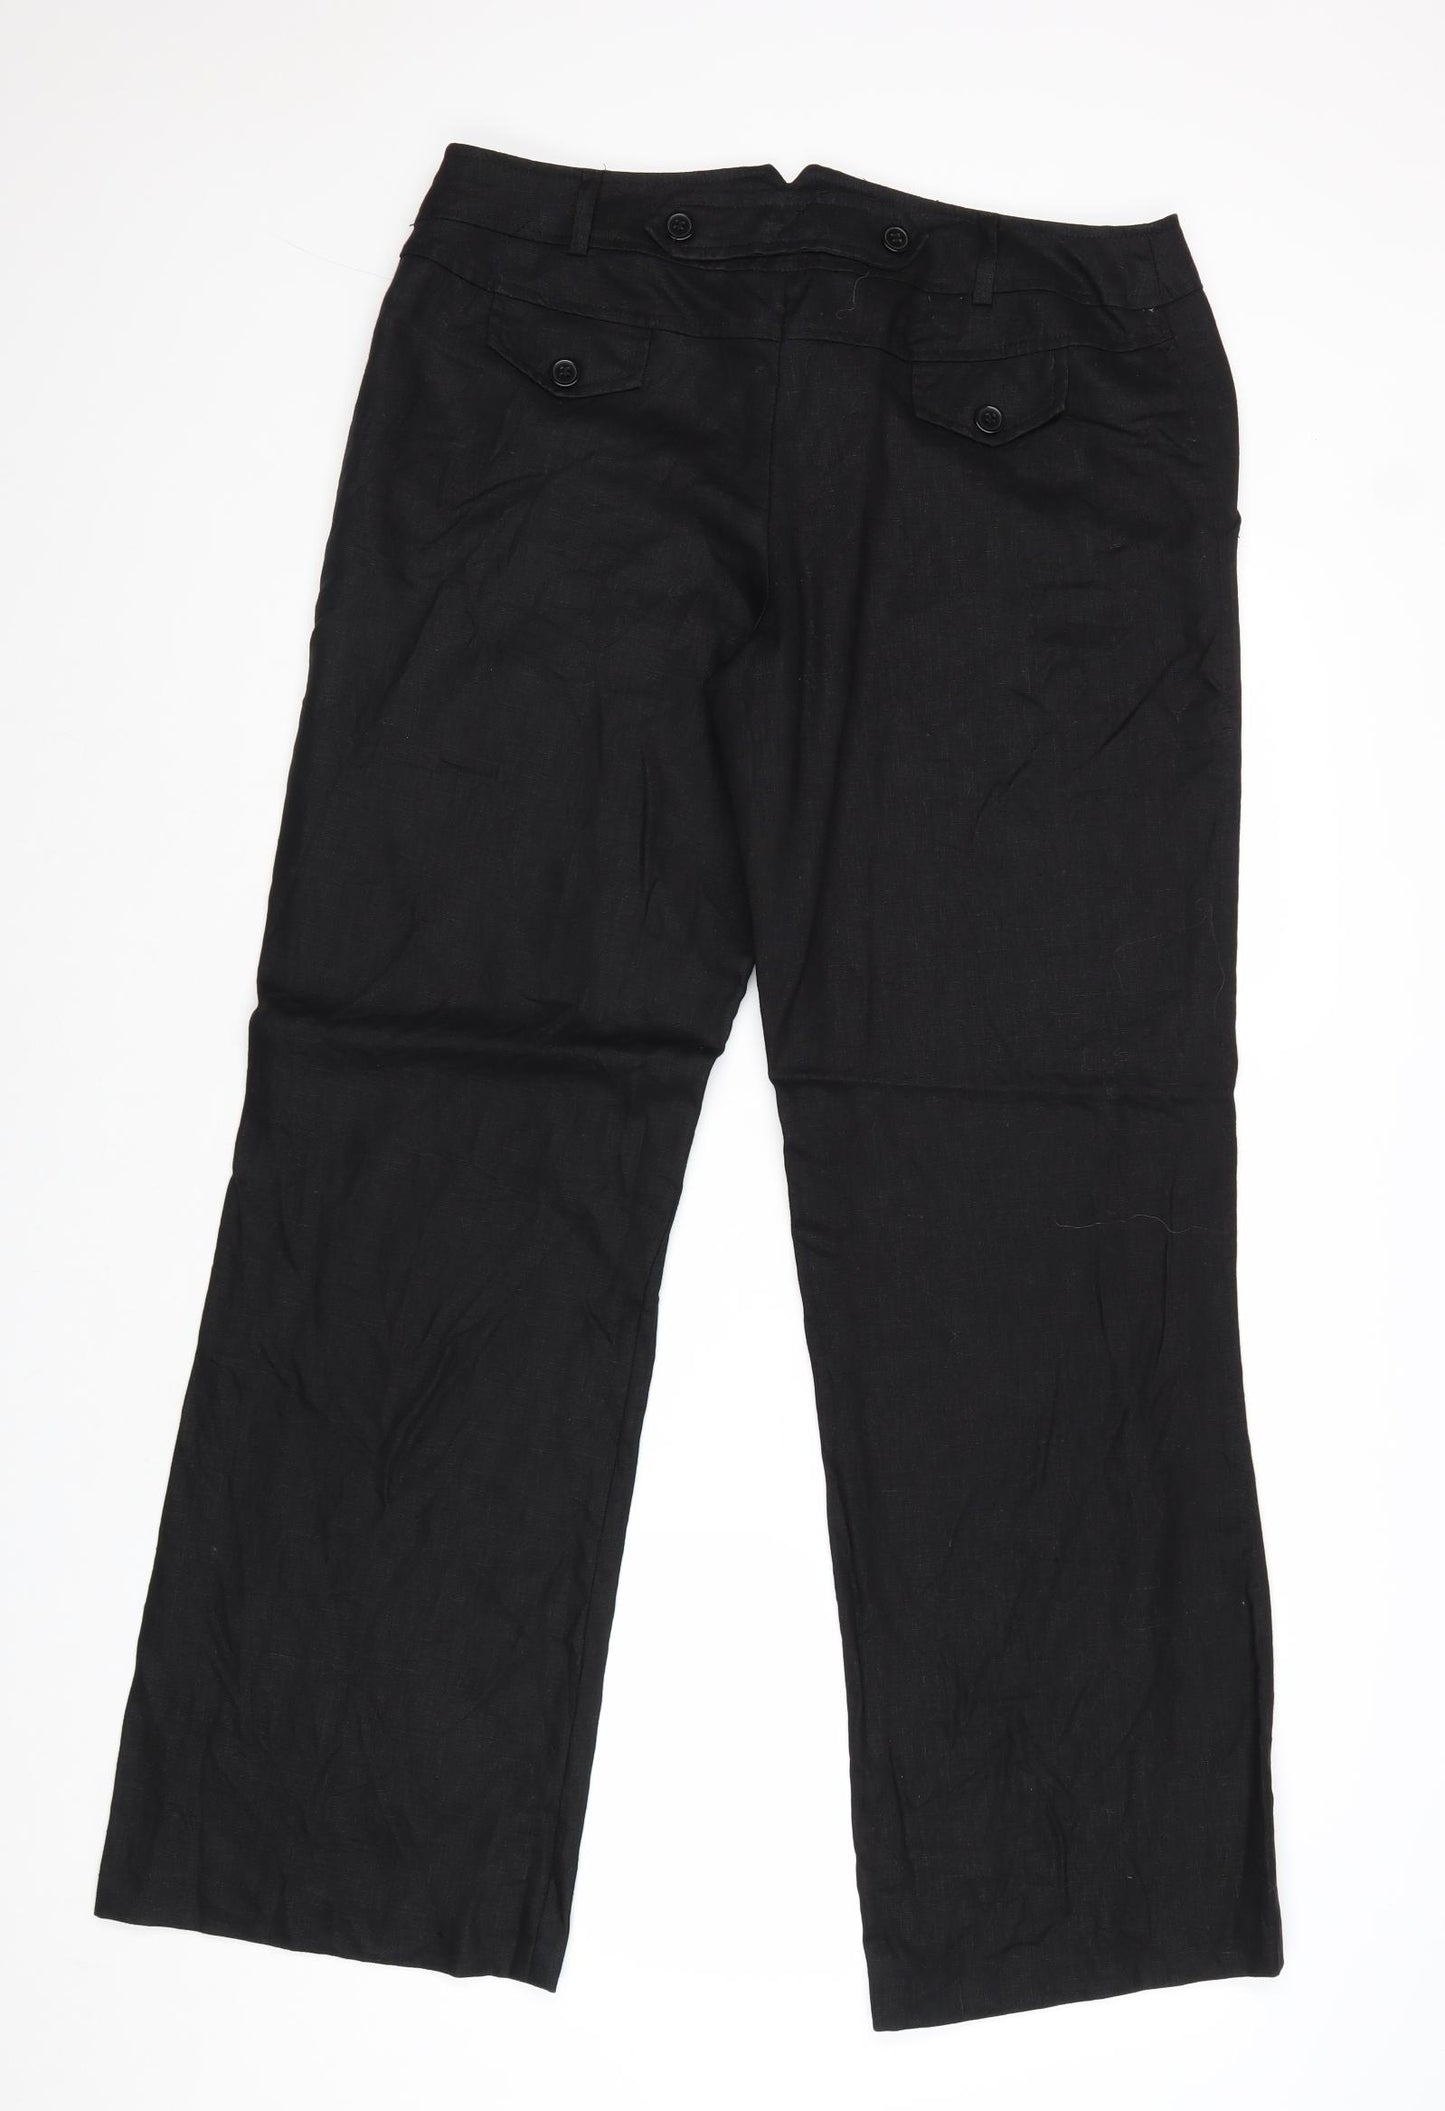 Dunnes Stores Womens Black Polyester Trousers Size 14 Regular Zip